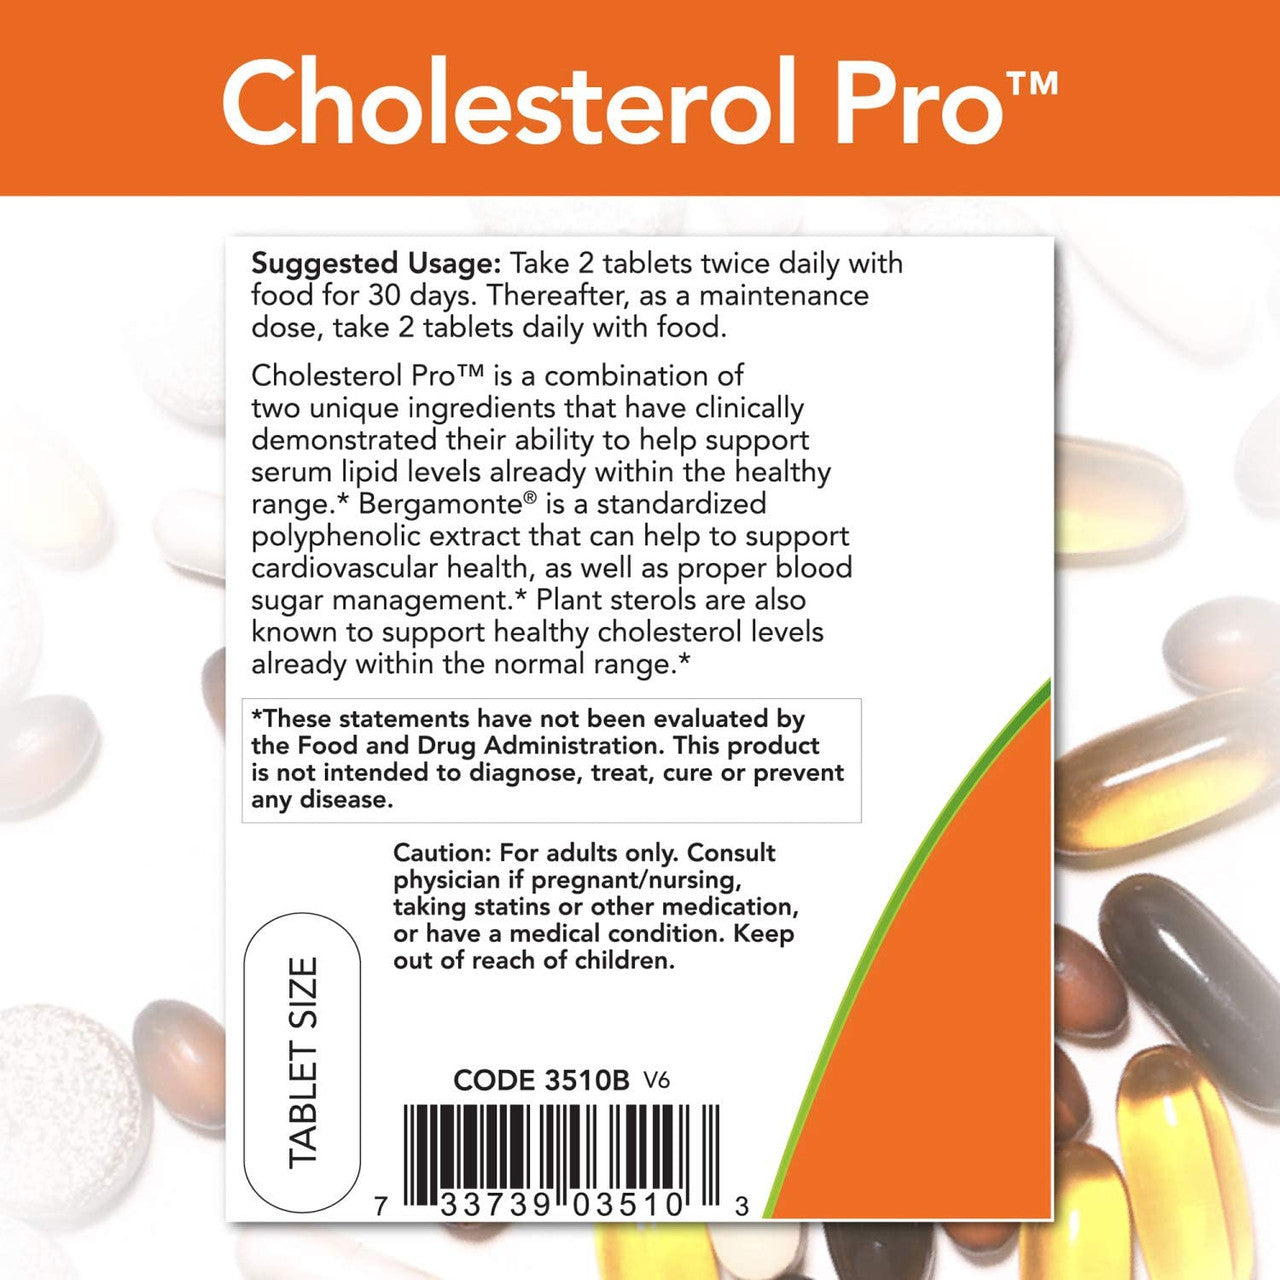 Now Cholesterol Pro directions